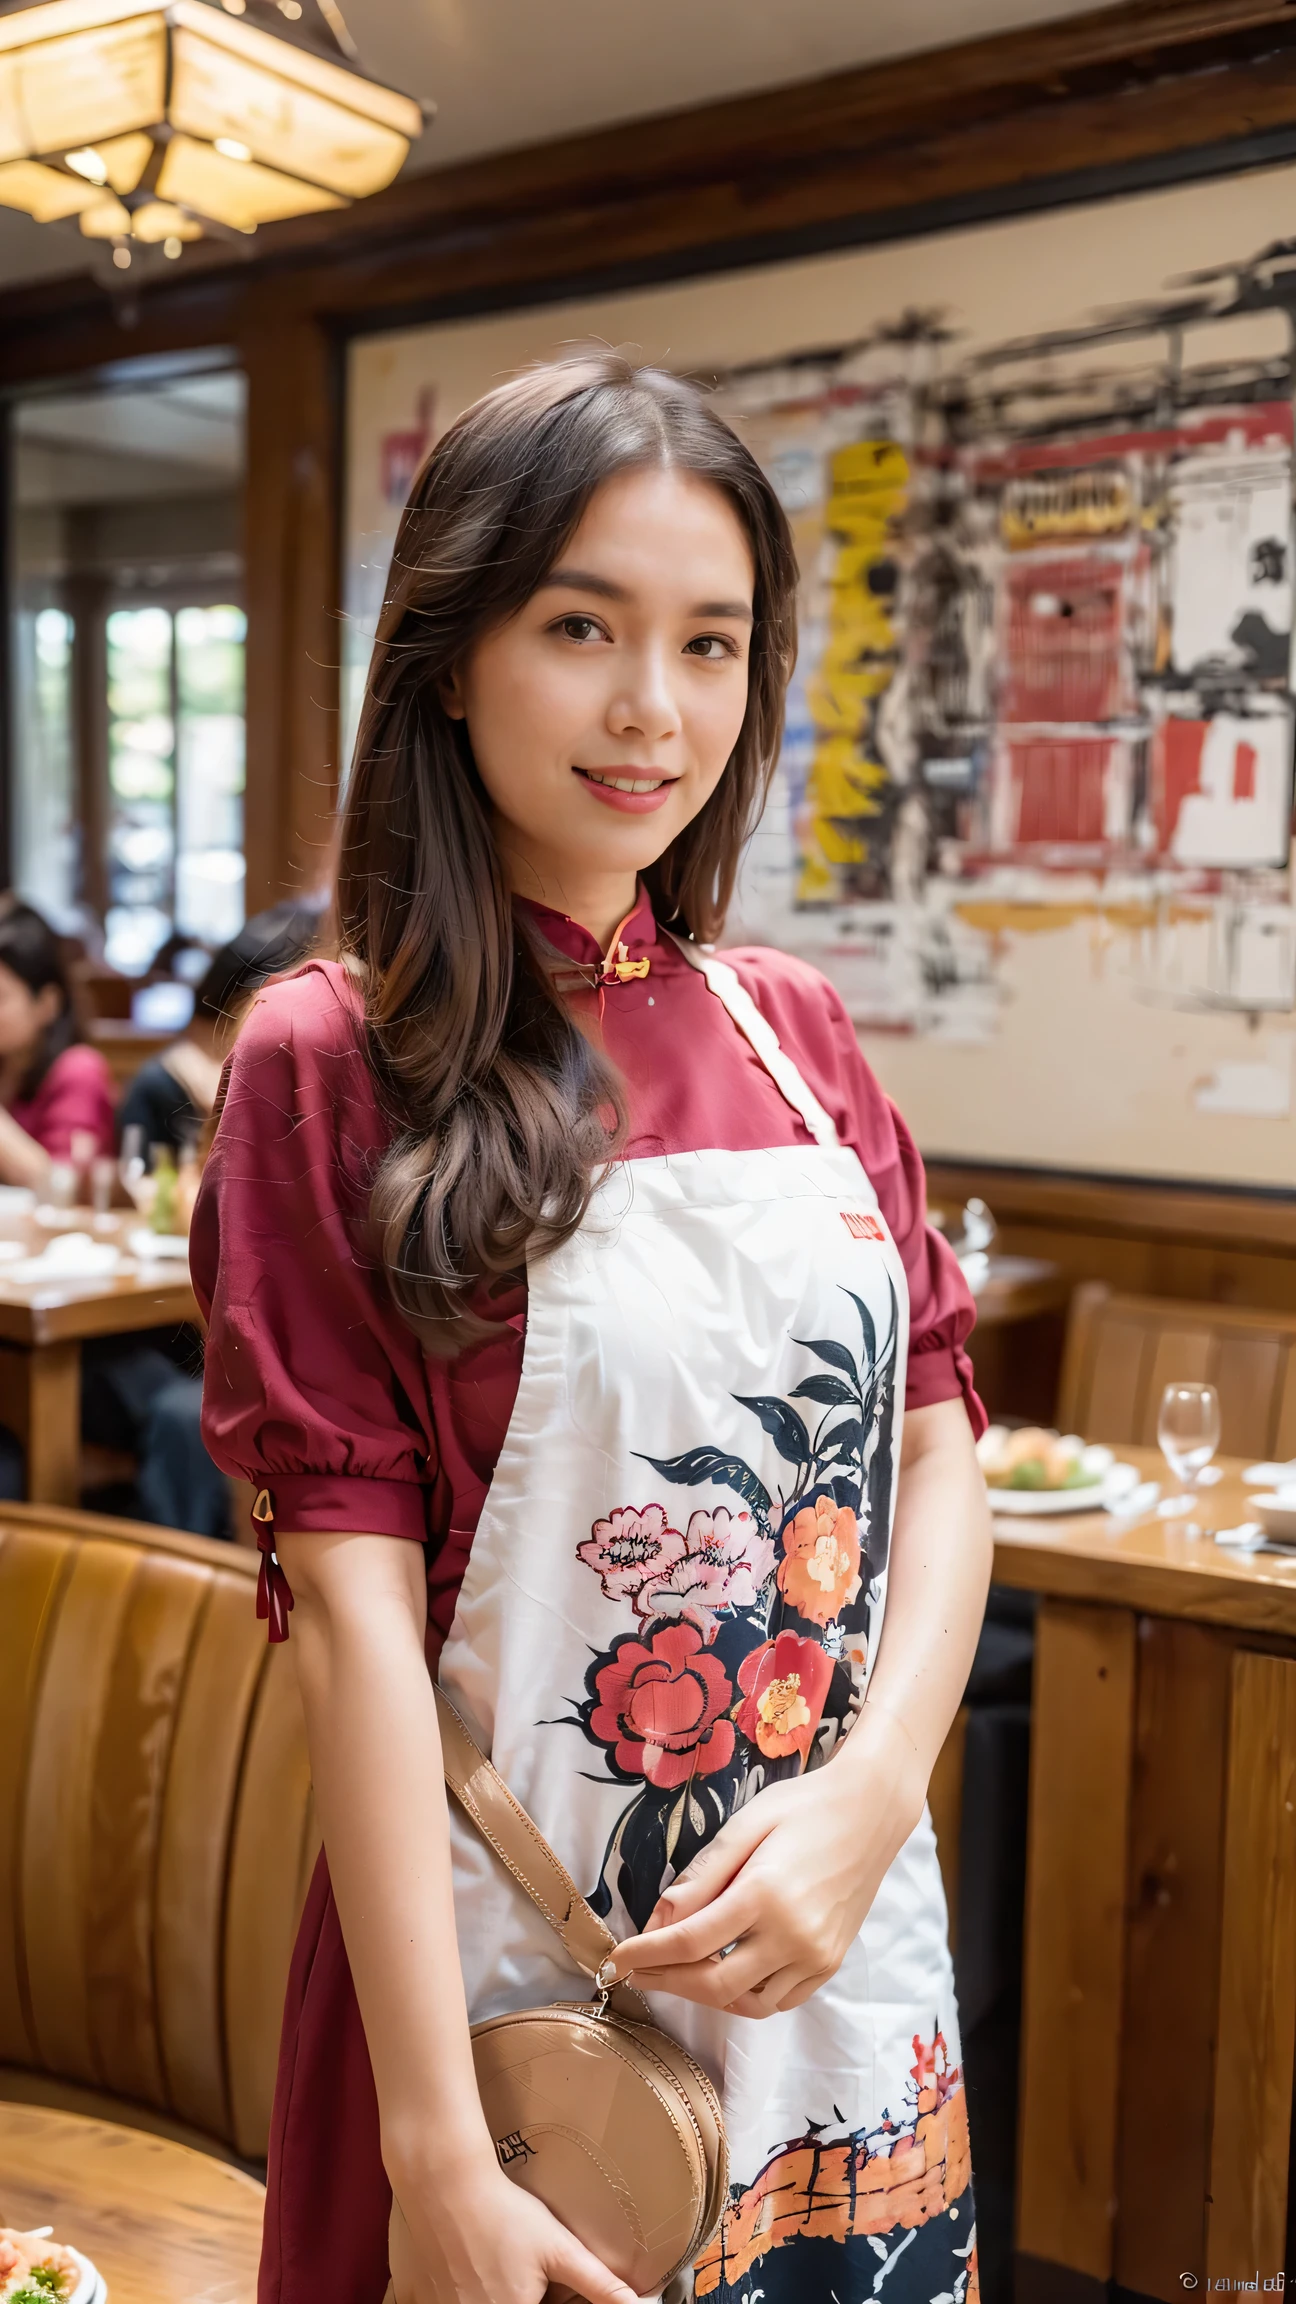 （Super fine，fidelity：1.37），portrait，Chinese restaurant owner，black hair，brown eyes，delicate lips，Put on an apron，confident smile，Neat appearance，Chinese traditional spring clothing，floral pattern，Standing in a brightly lit restaurant，antique wooden furniture，Elaborately carved decoration，Chinese traditional elements，Beautifully painted porcelain plates and teapots，Authentic Chinese cuisine，Vibrant color palette，Defocused lights in the background create a warm and inviting atmosphere